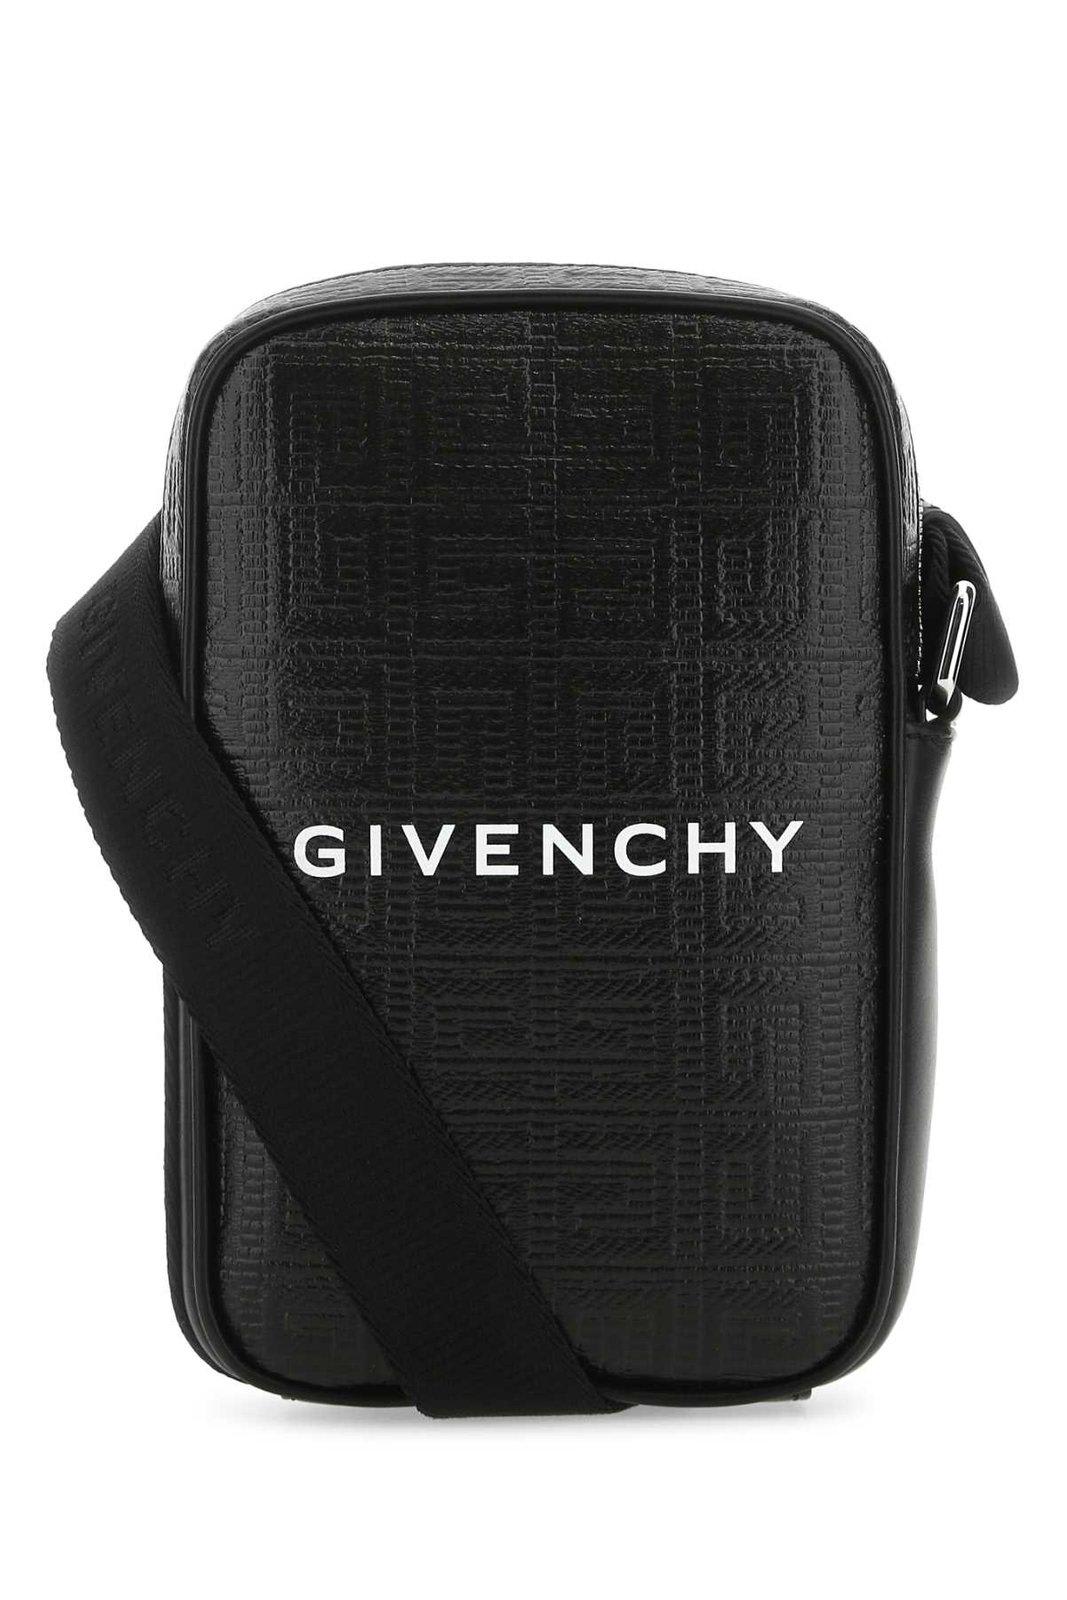 Givenchy 4g Motif Smartphone Pouch